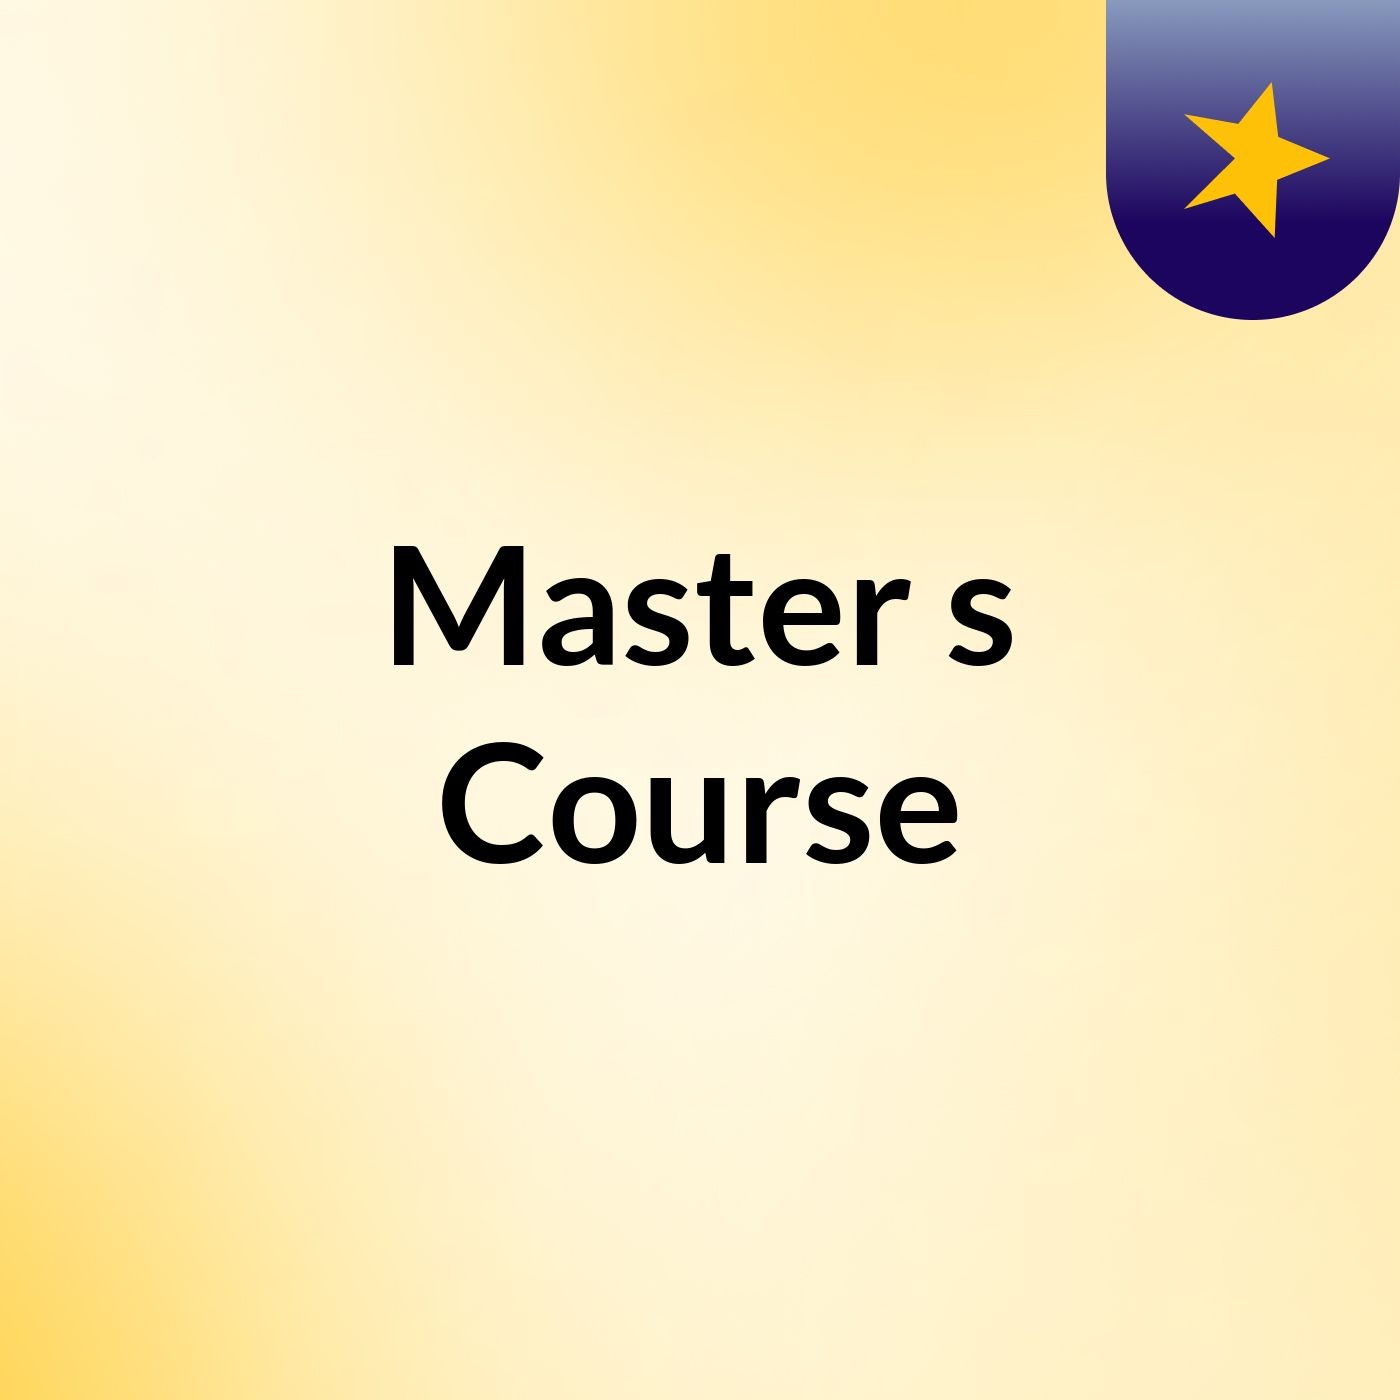 Master's Course